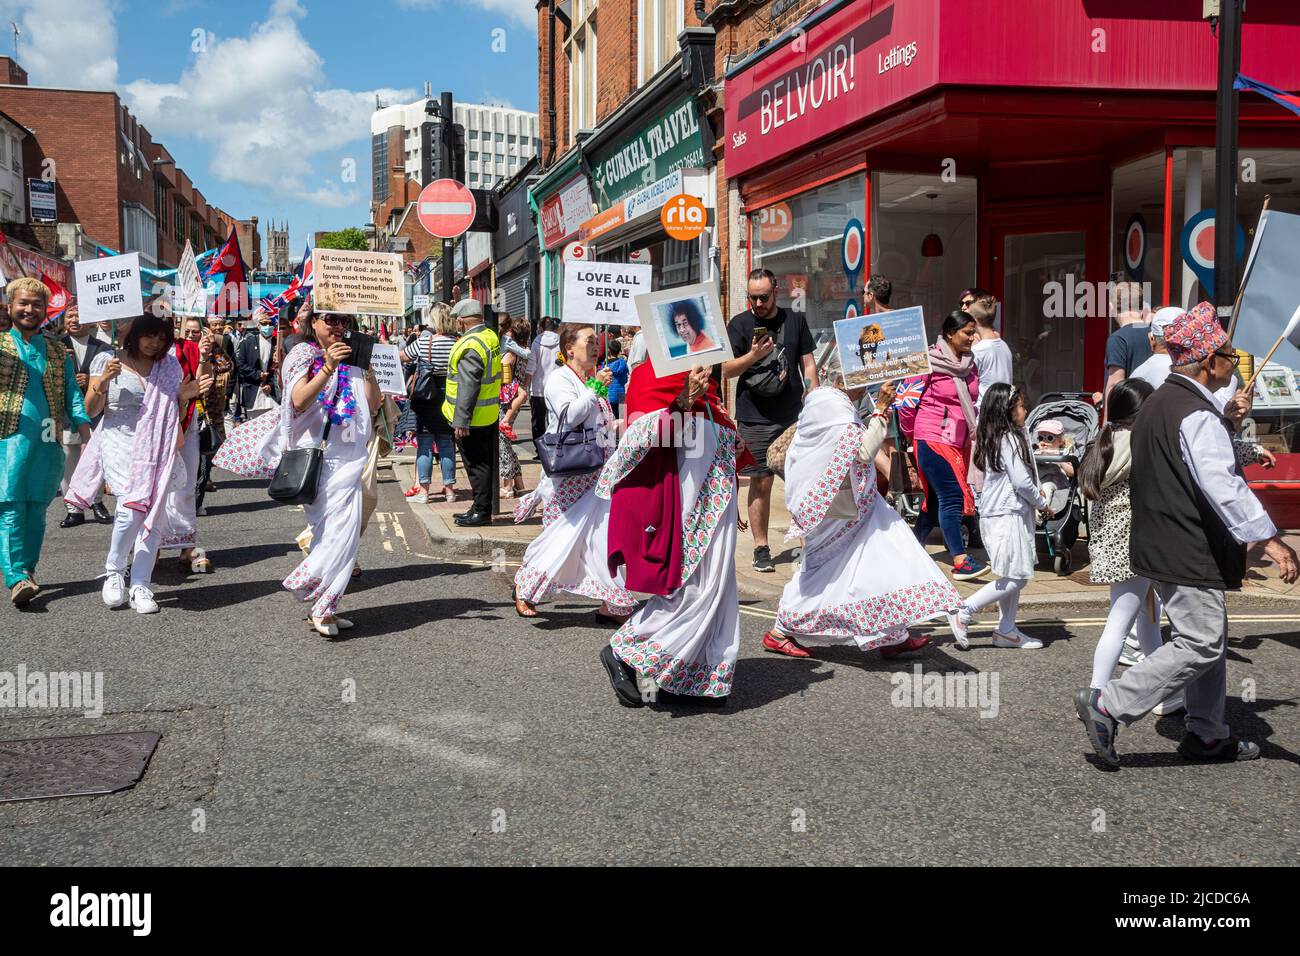 The Grand Parade at Victoria Day, an annual event in Aldershot, Hampshire, England, UK. Followers of Indian guru Sathya Sai Baba taking part. Stock Photo